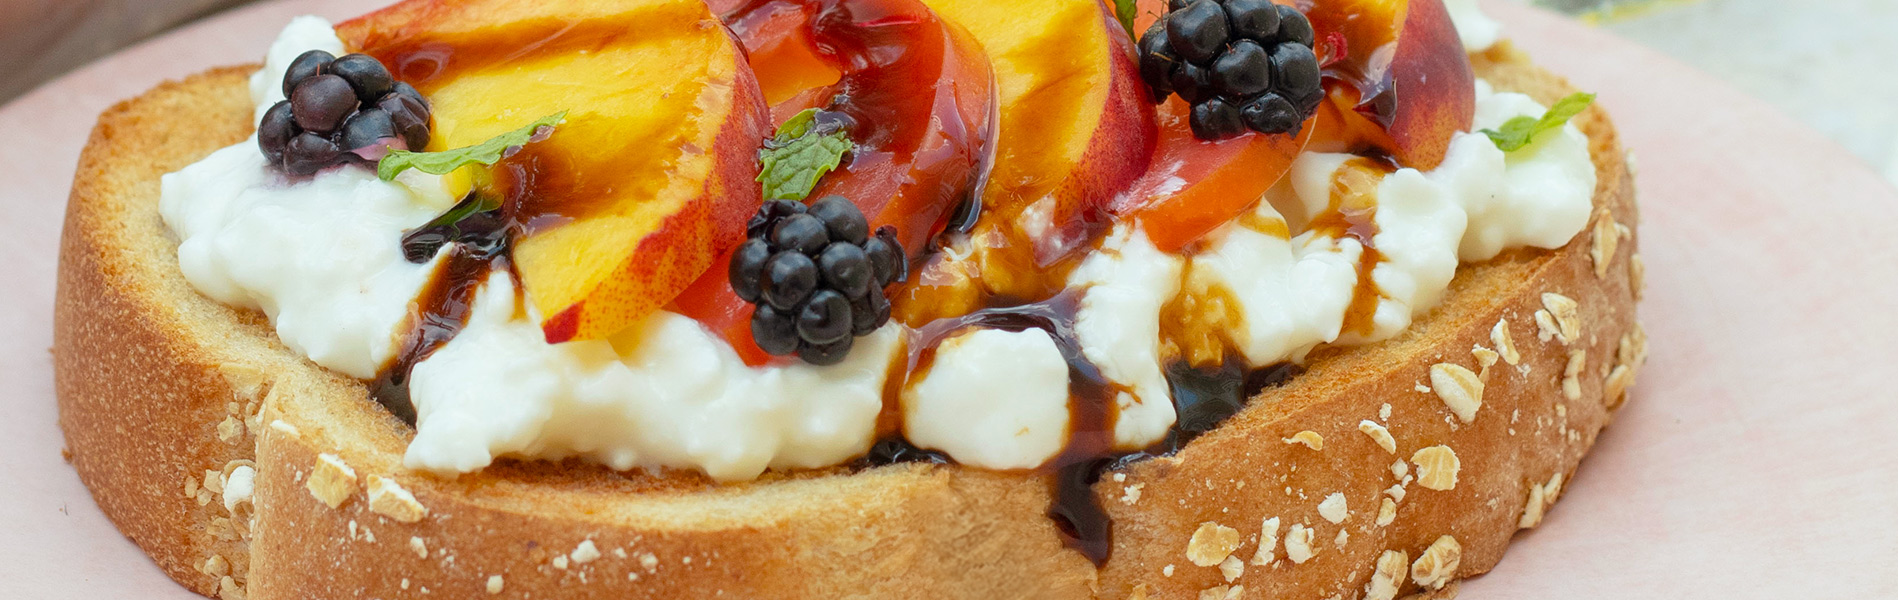 Toast with cottage cheese, peaches, tomatoes, blackberries, balsamic glaze and mint on Artesnao Smooth Multigrain Bread